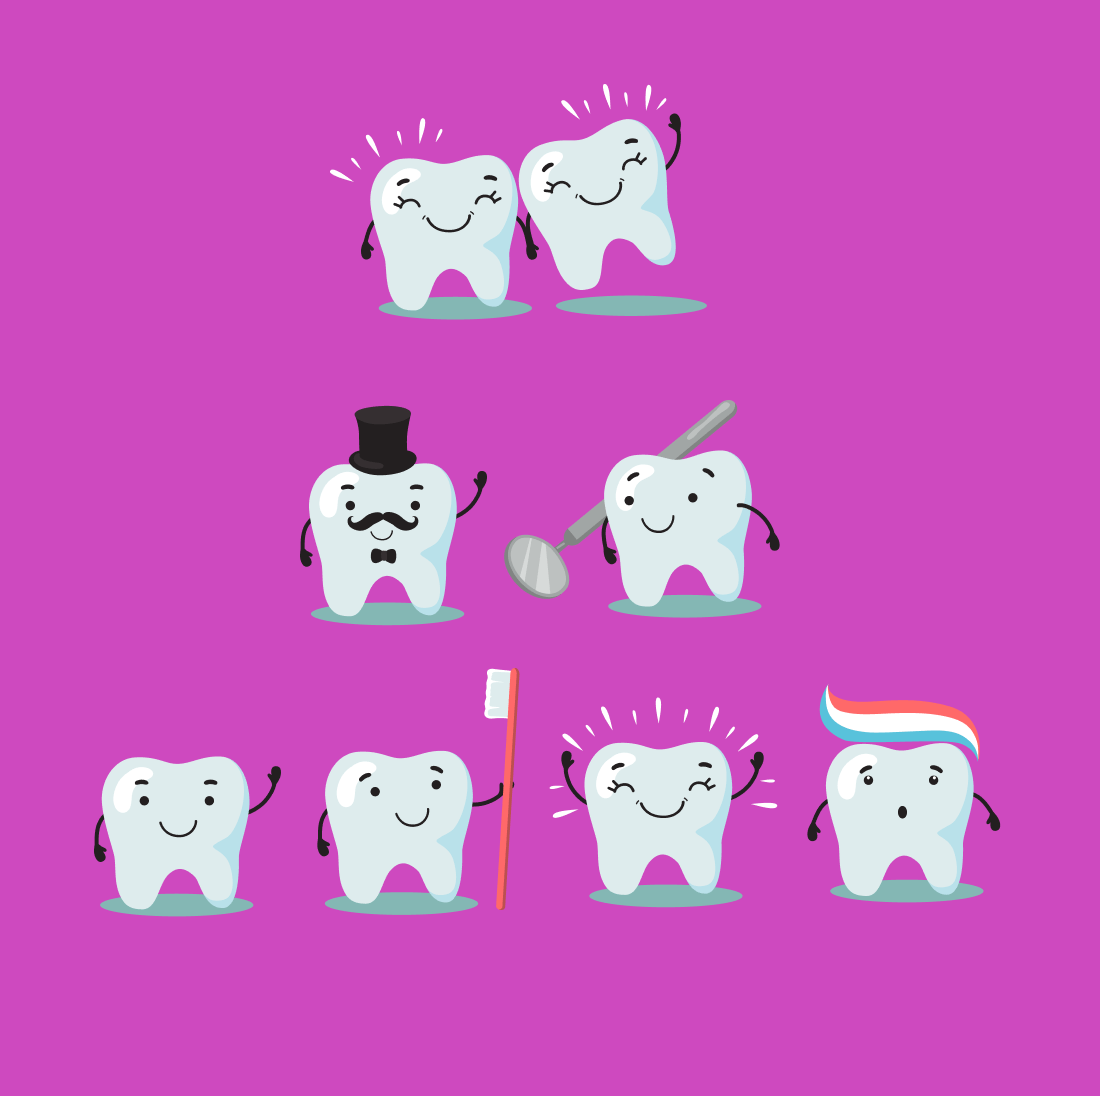 Couples of happy teeth with handles, mustaches, toothbrushes, bows.